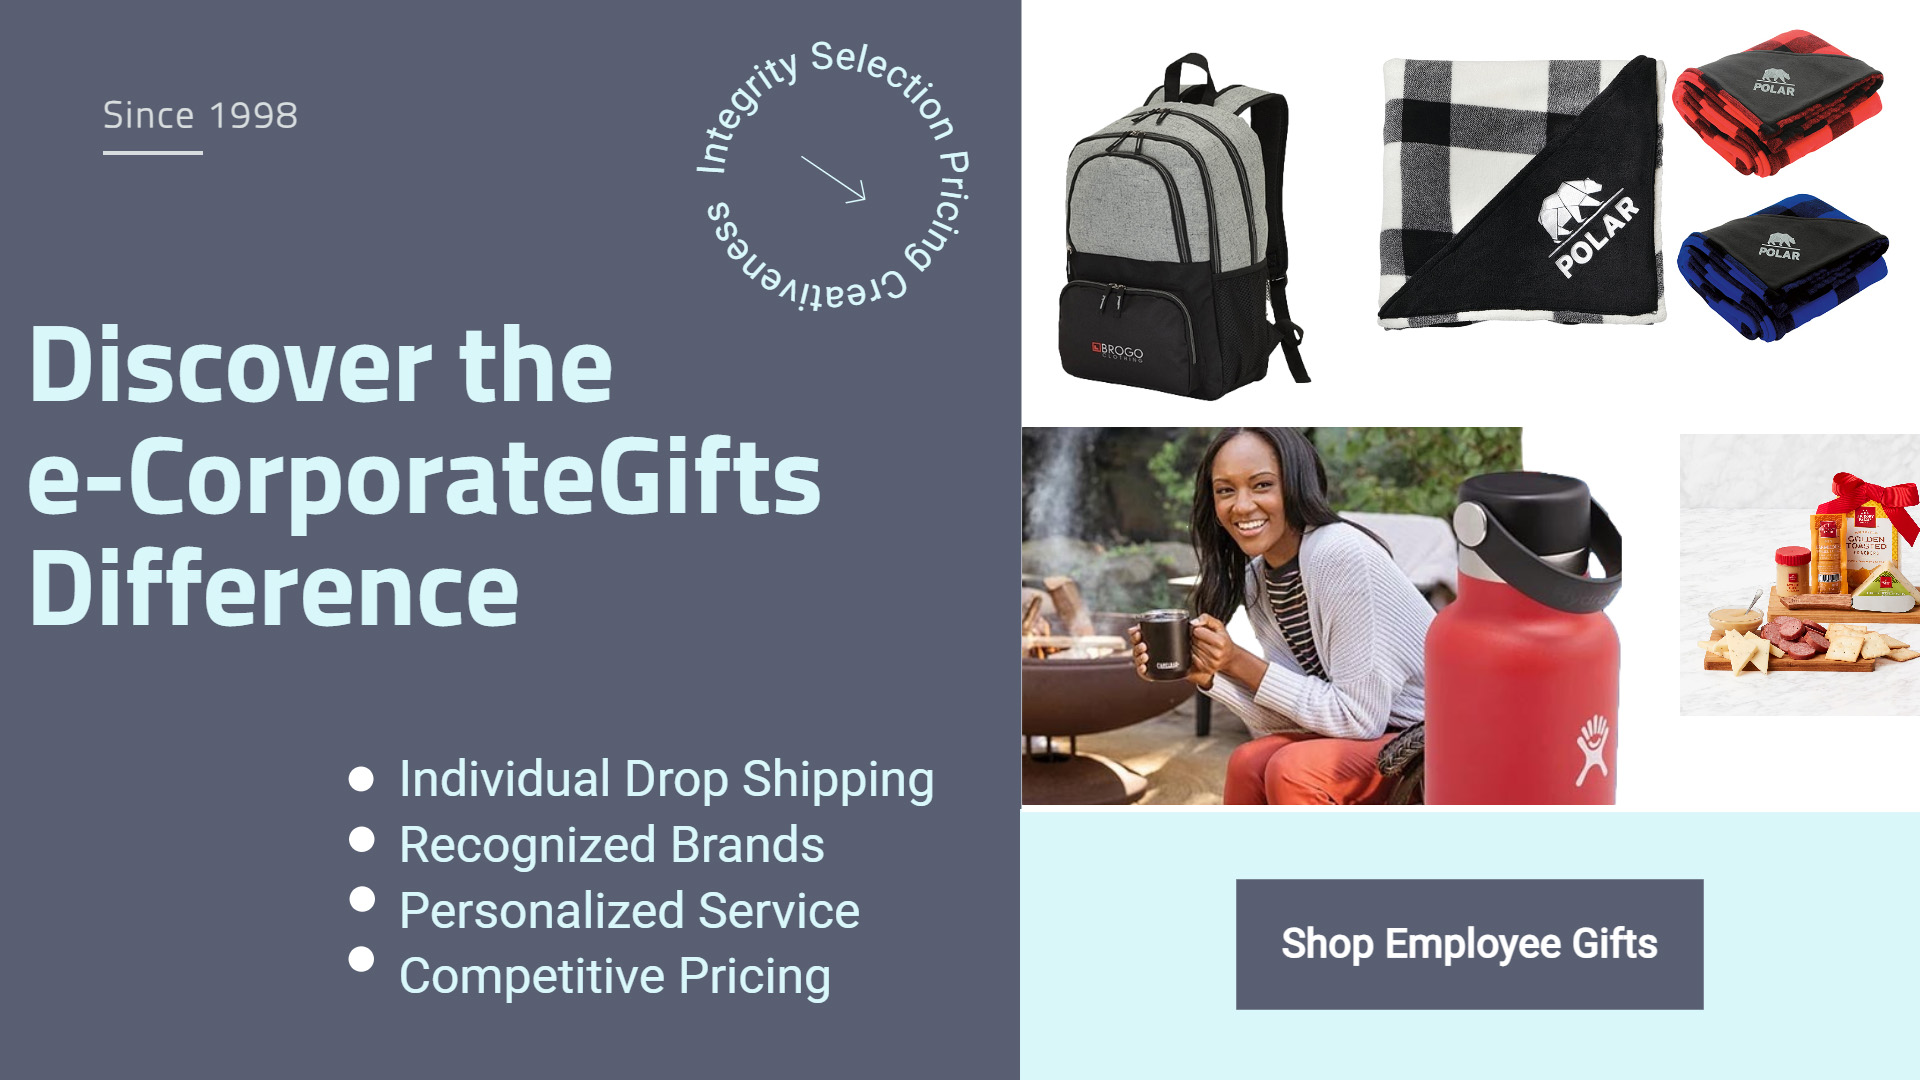 Corporate Gifting - Client and Employee Gifts - Ember®